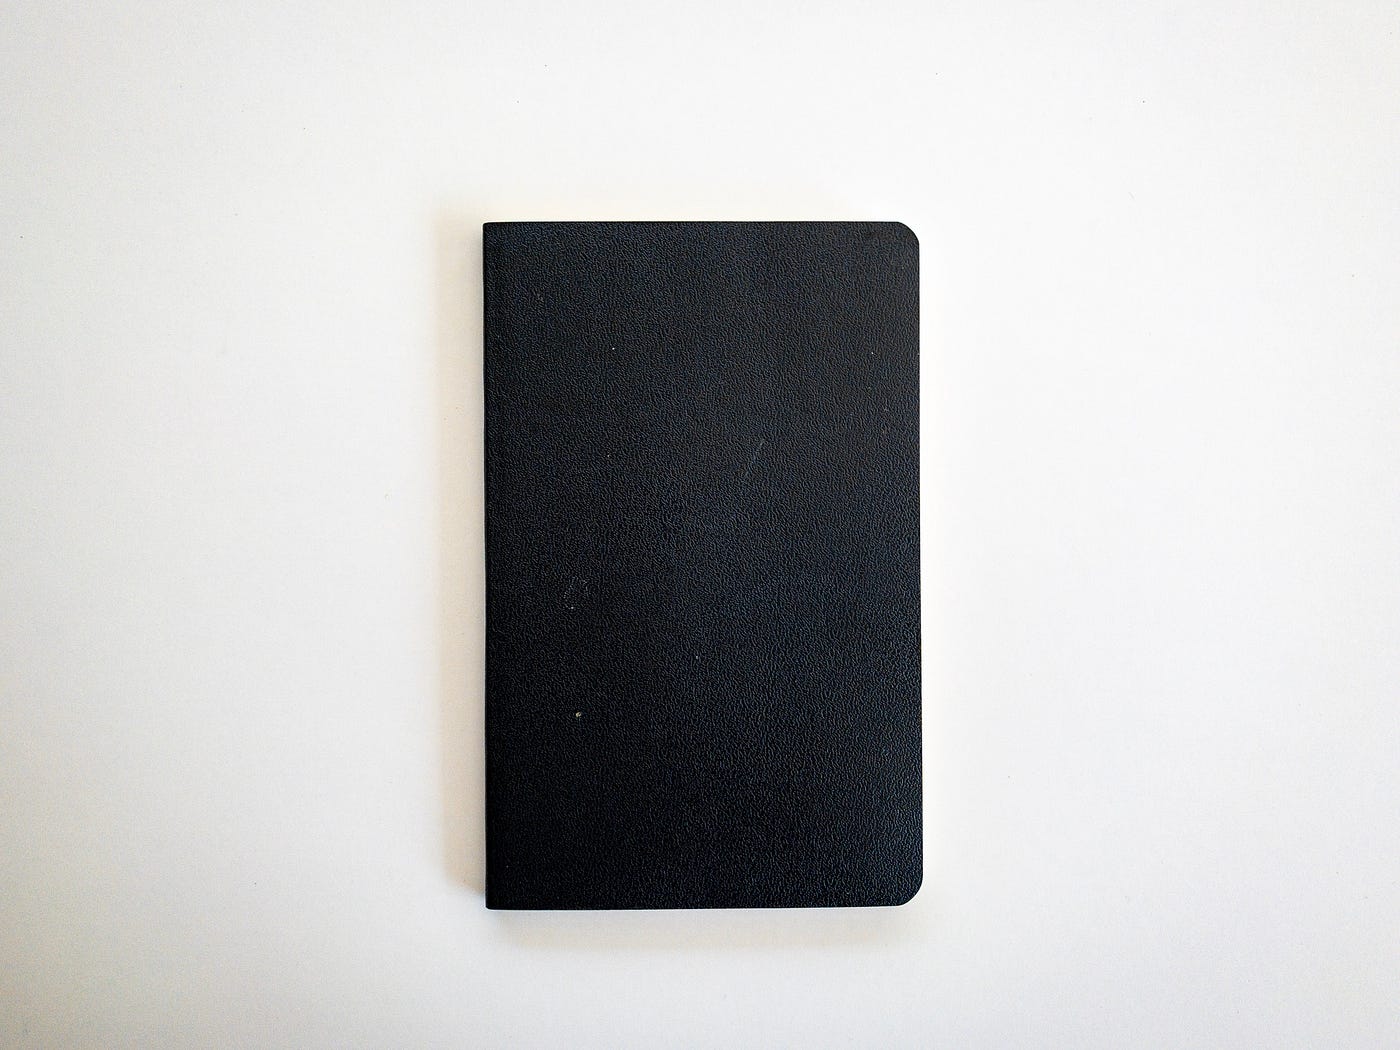 Obsessed: Bullet Journals. A simple task management system for…, by Ryan  Ludman